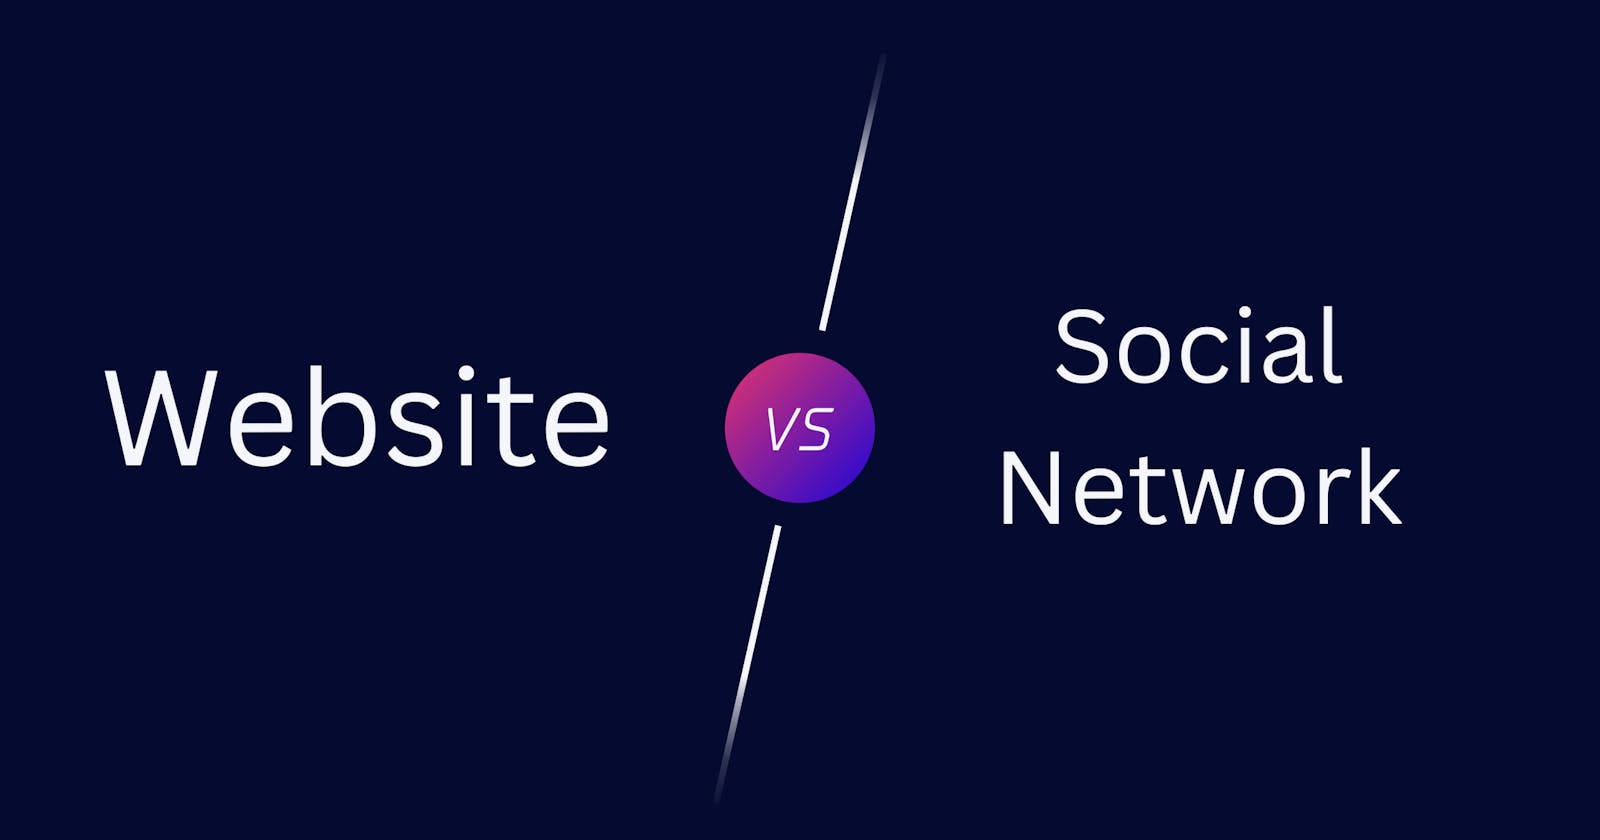 Website vs Social Media, for businesses & brands. How are they different? Do I need both?